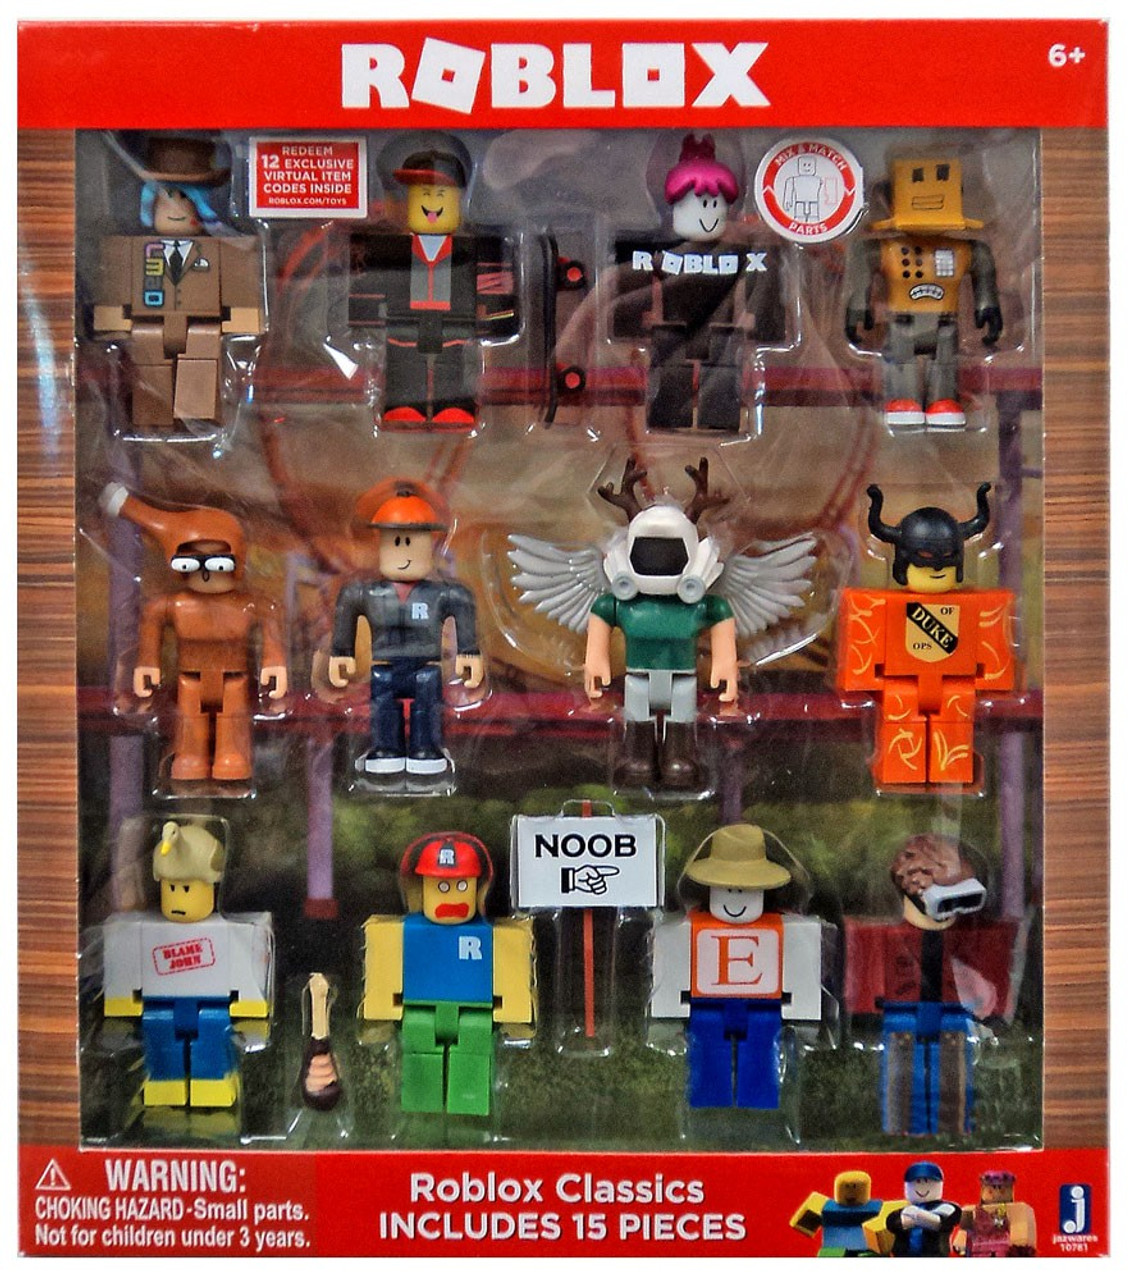 Roblox Series 1 Roblox Classics Exclusive 3 Action Figure 12 Pack Includes 12 Online Item Codes Jazwares Toywiz - roblox classics series 2 limited set 12 toys figures 15pc